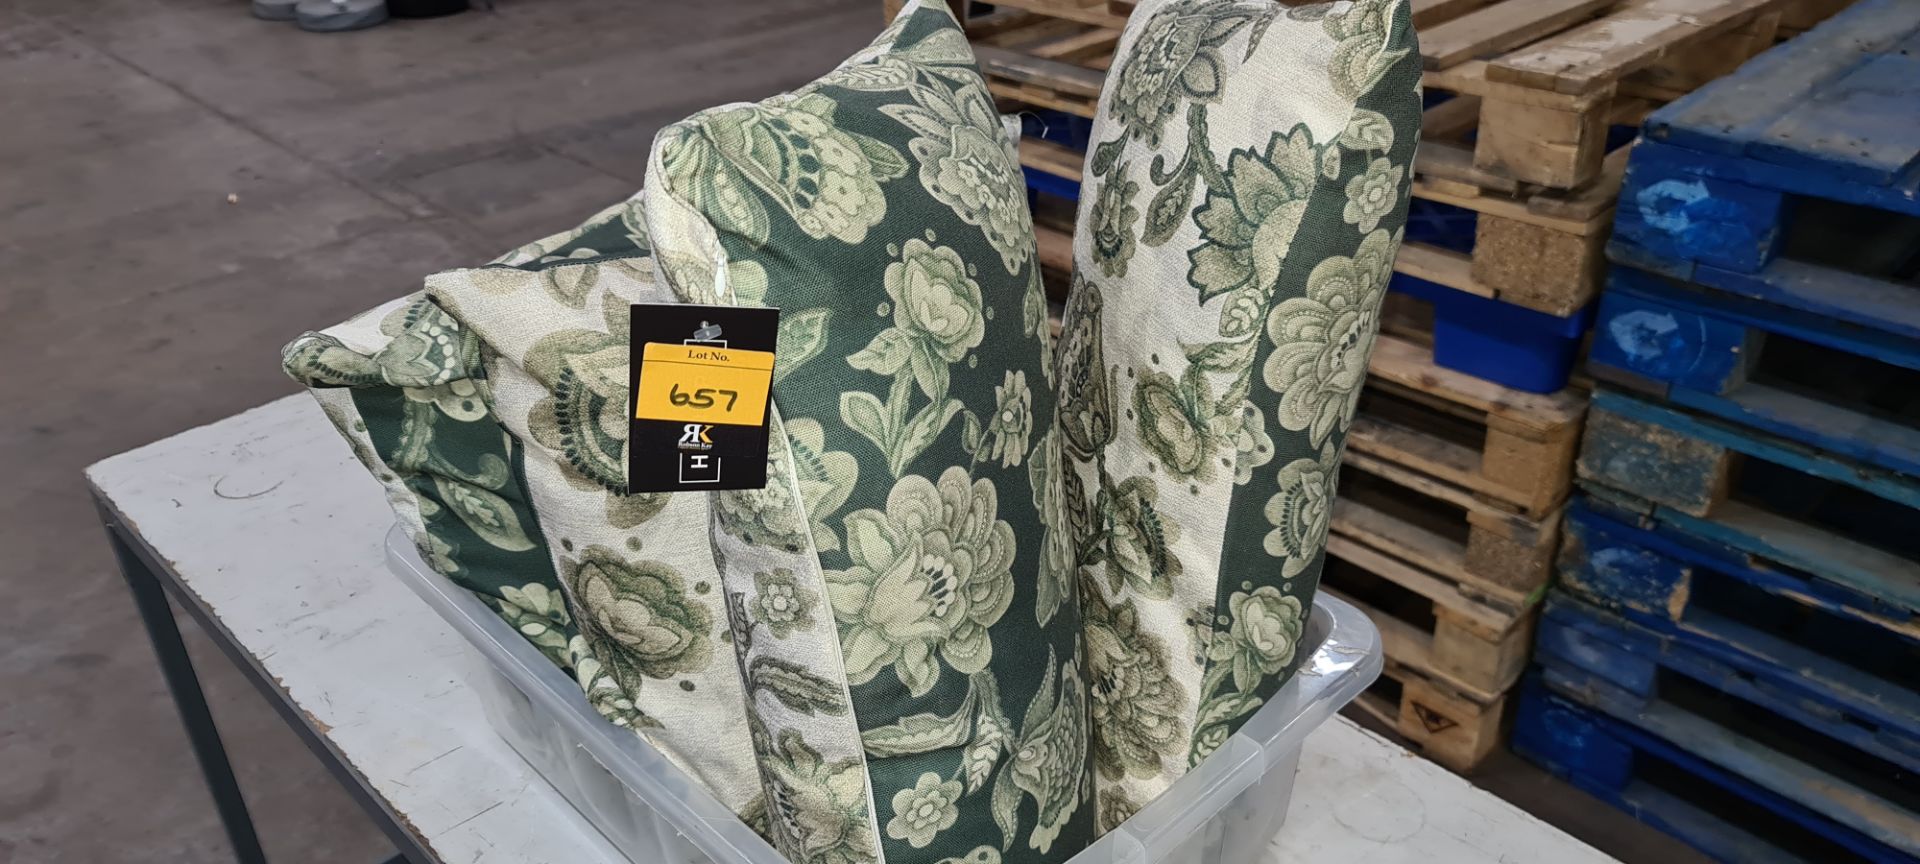 Set of 4 green patterned cushions (2 rectangular & 2 square), the rectangular cushions priced at £22 - Image 2 of 3